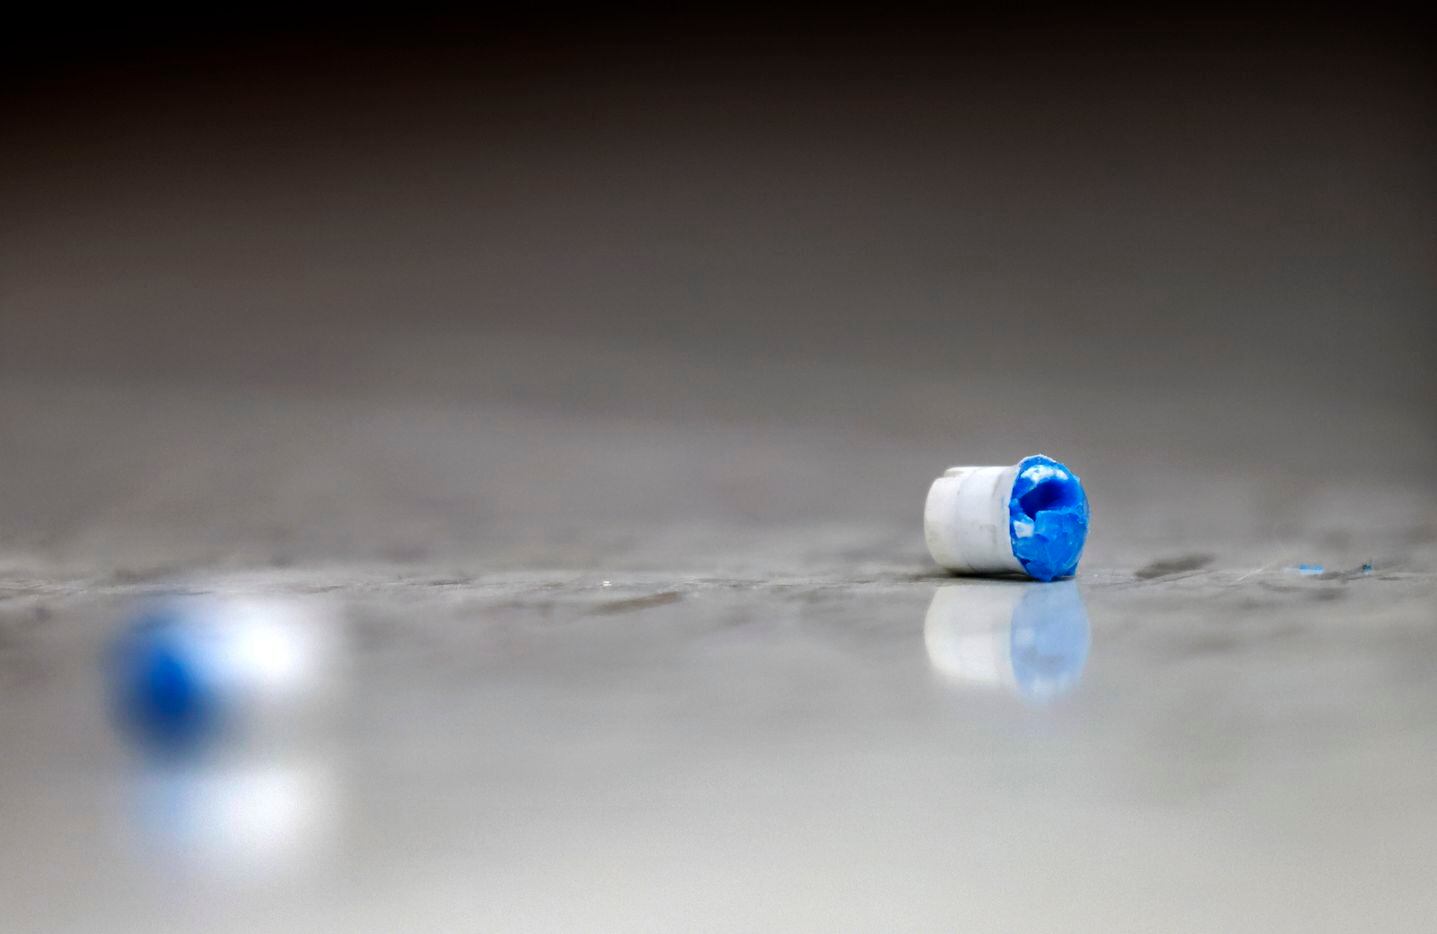 Used soap-based marking cartridges lie on the floor during a Simunition training scenario...